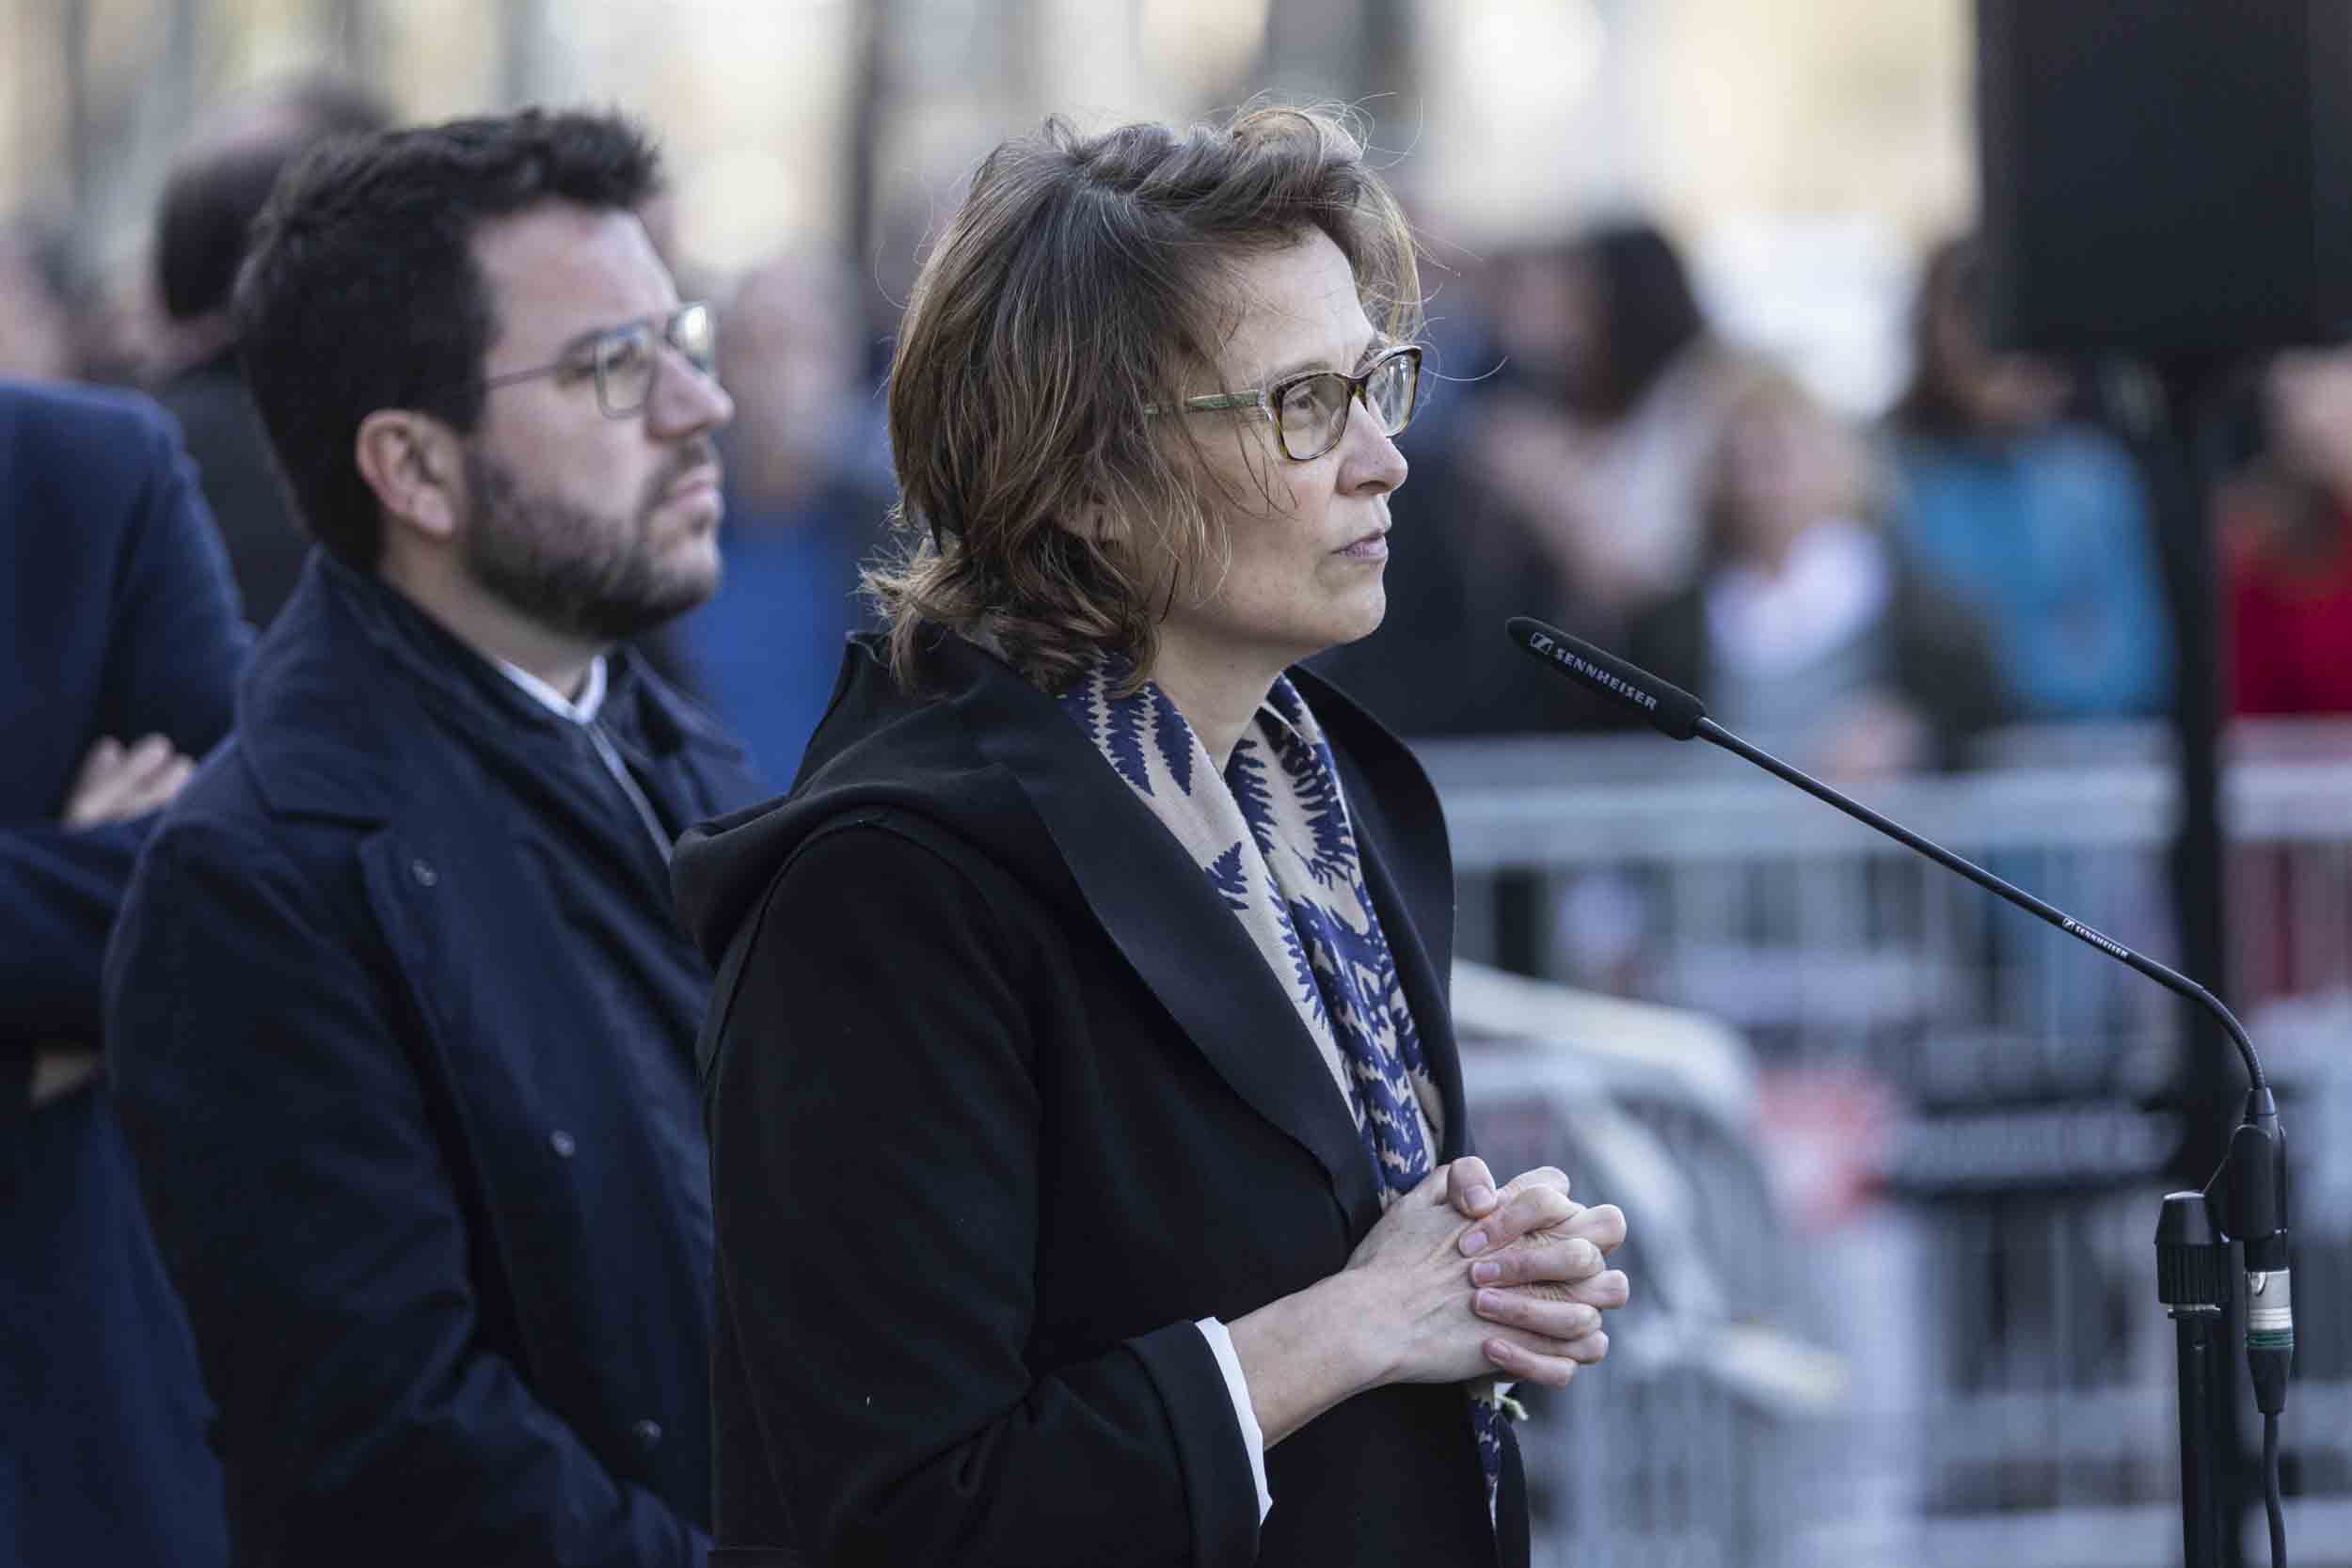 A high-speed trial for Catalan exile Meritxell Serret, target of Clara Ponsatí's reproaches